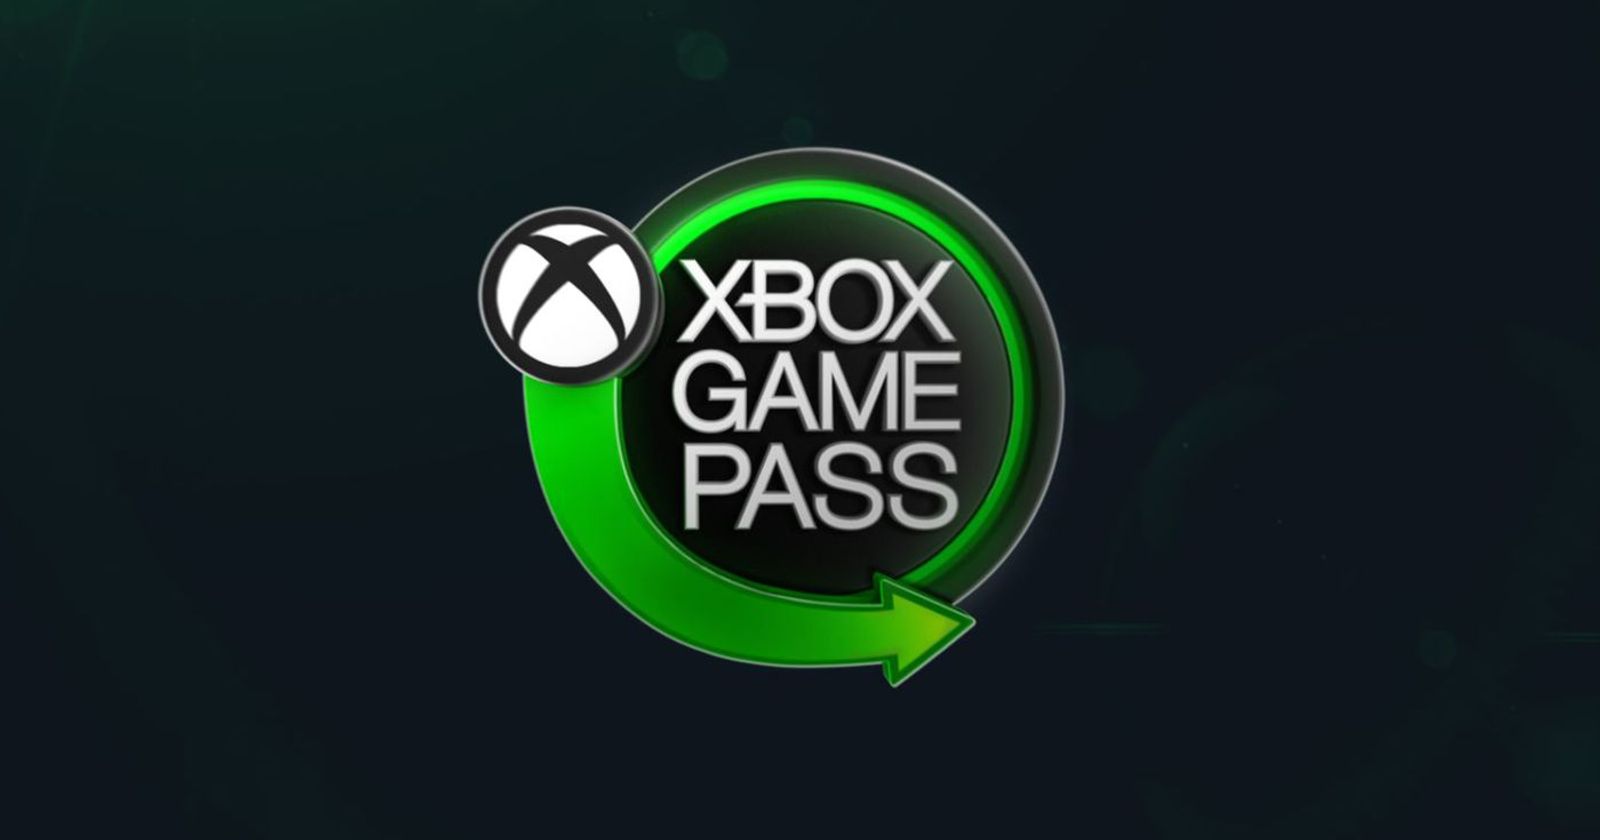 Xbox Game Pass August 2021: All The Games Coming To The Service